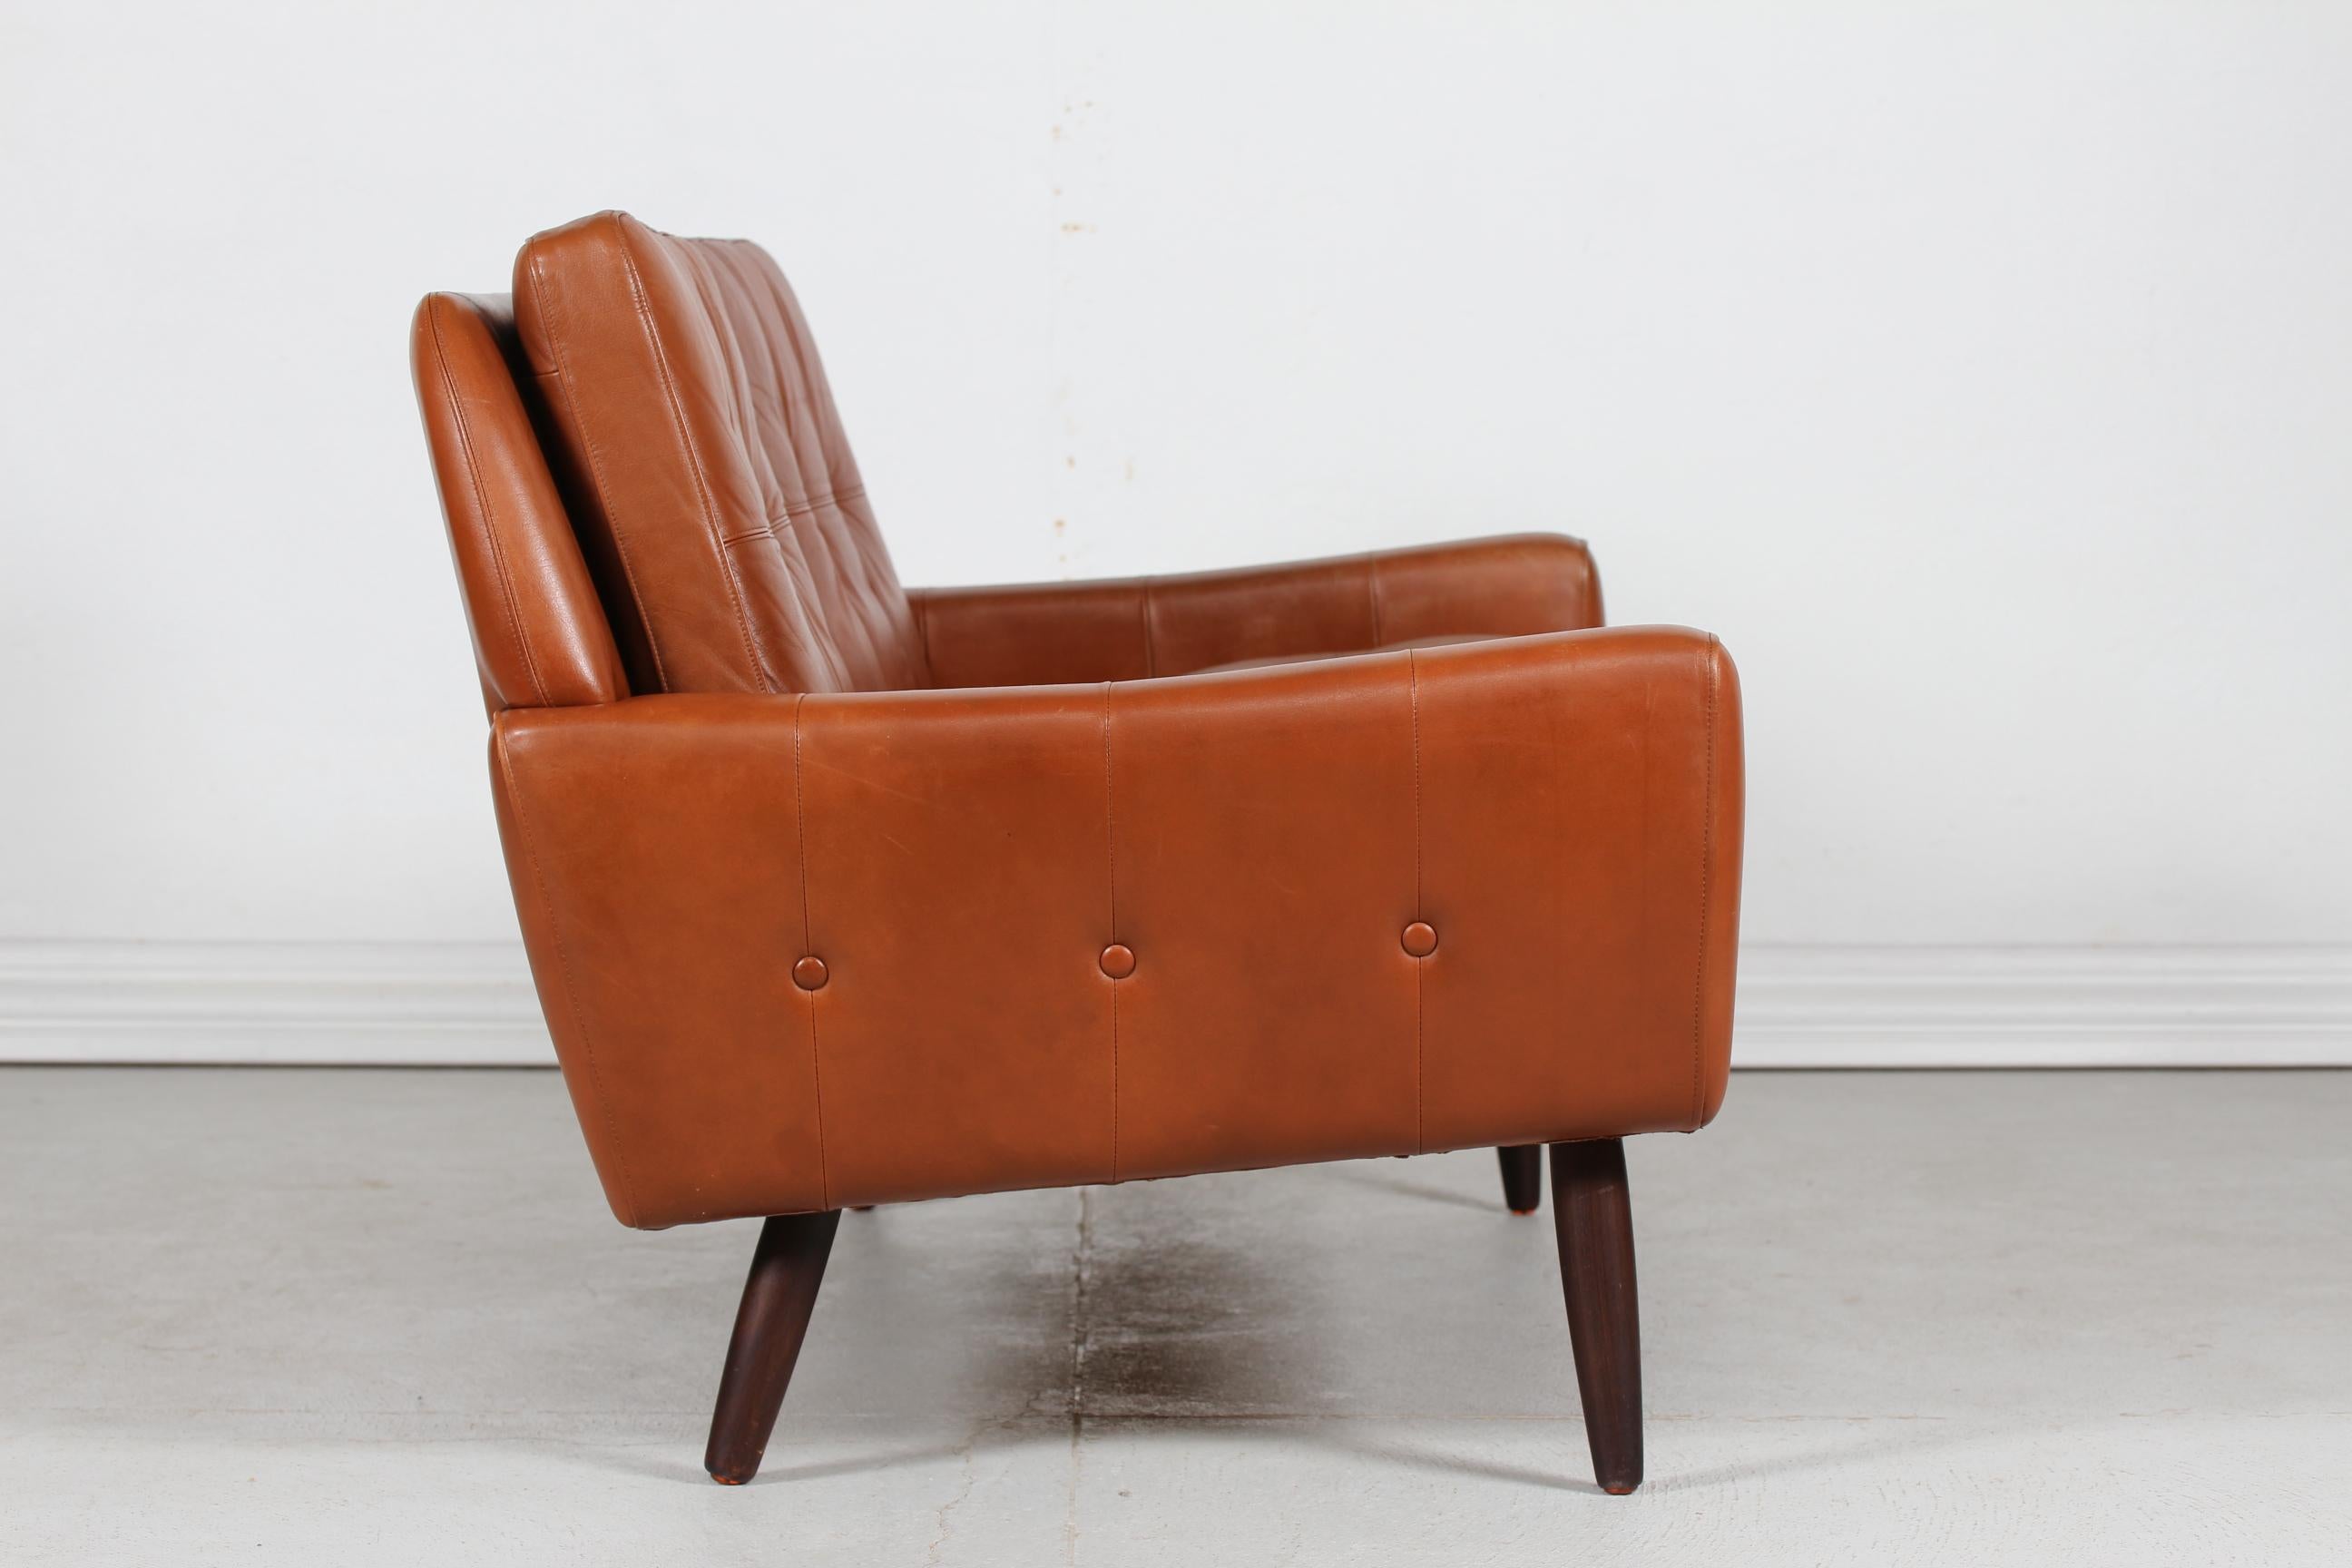 Danish Modern Two-Seat Sofa with Cognac-Colored Leather Made in Denmark 1960s In Good Condition For Sale In Aarhus C, DK